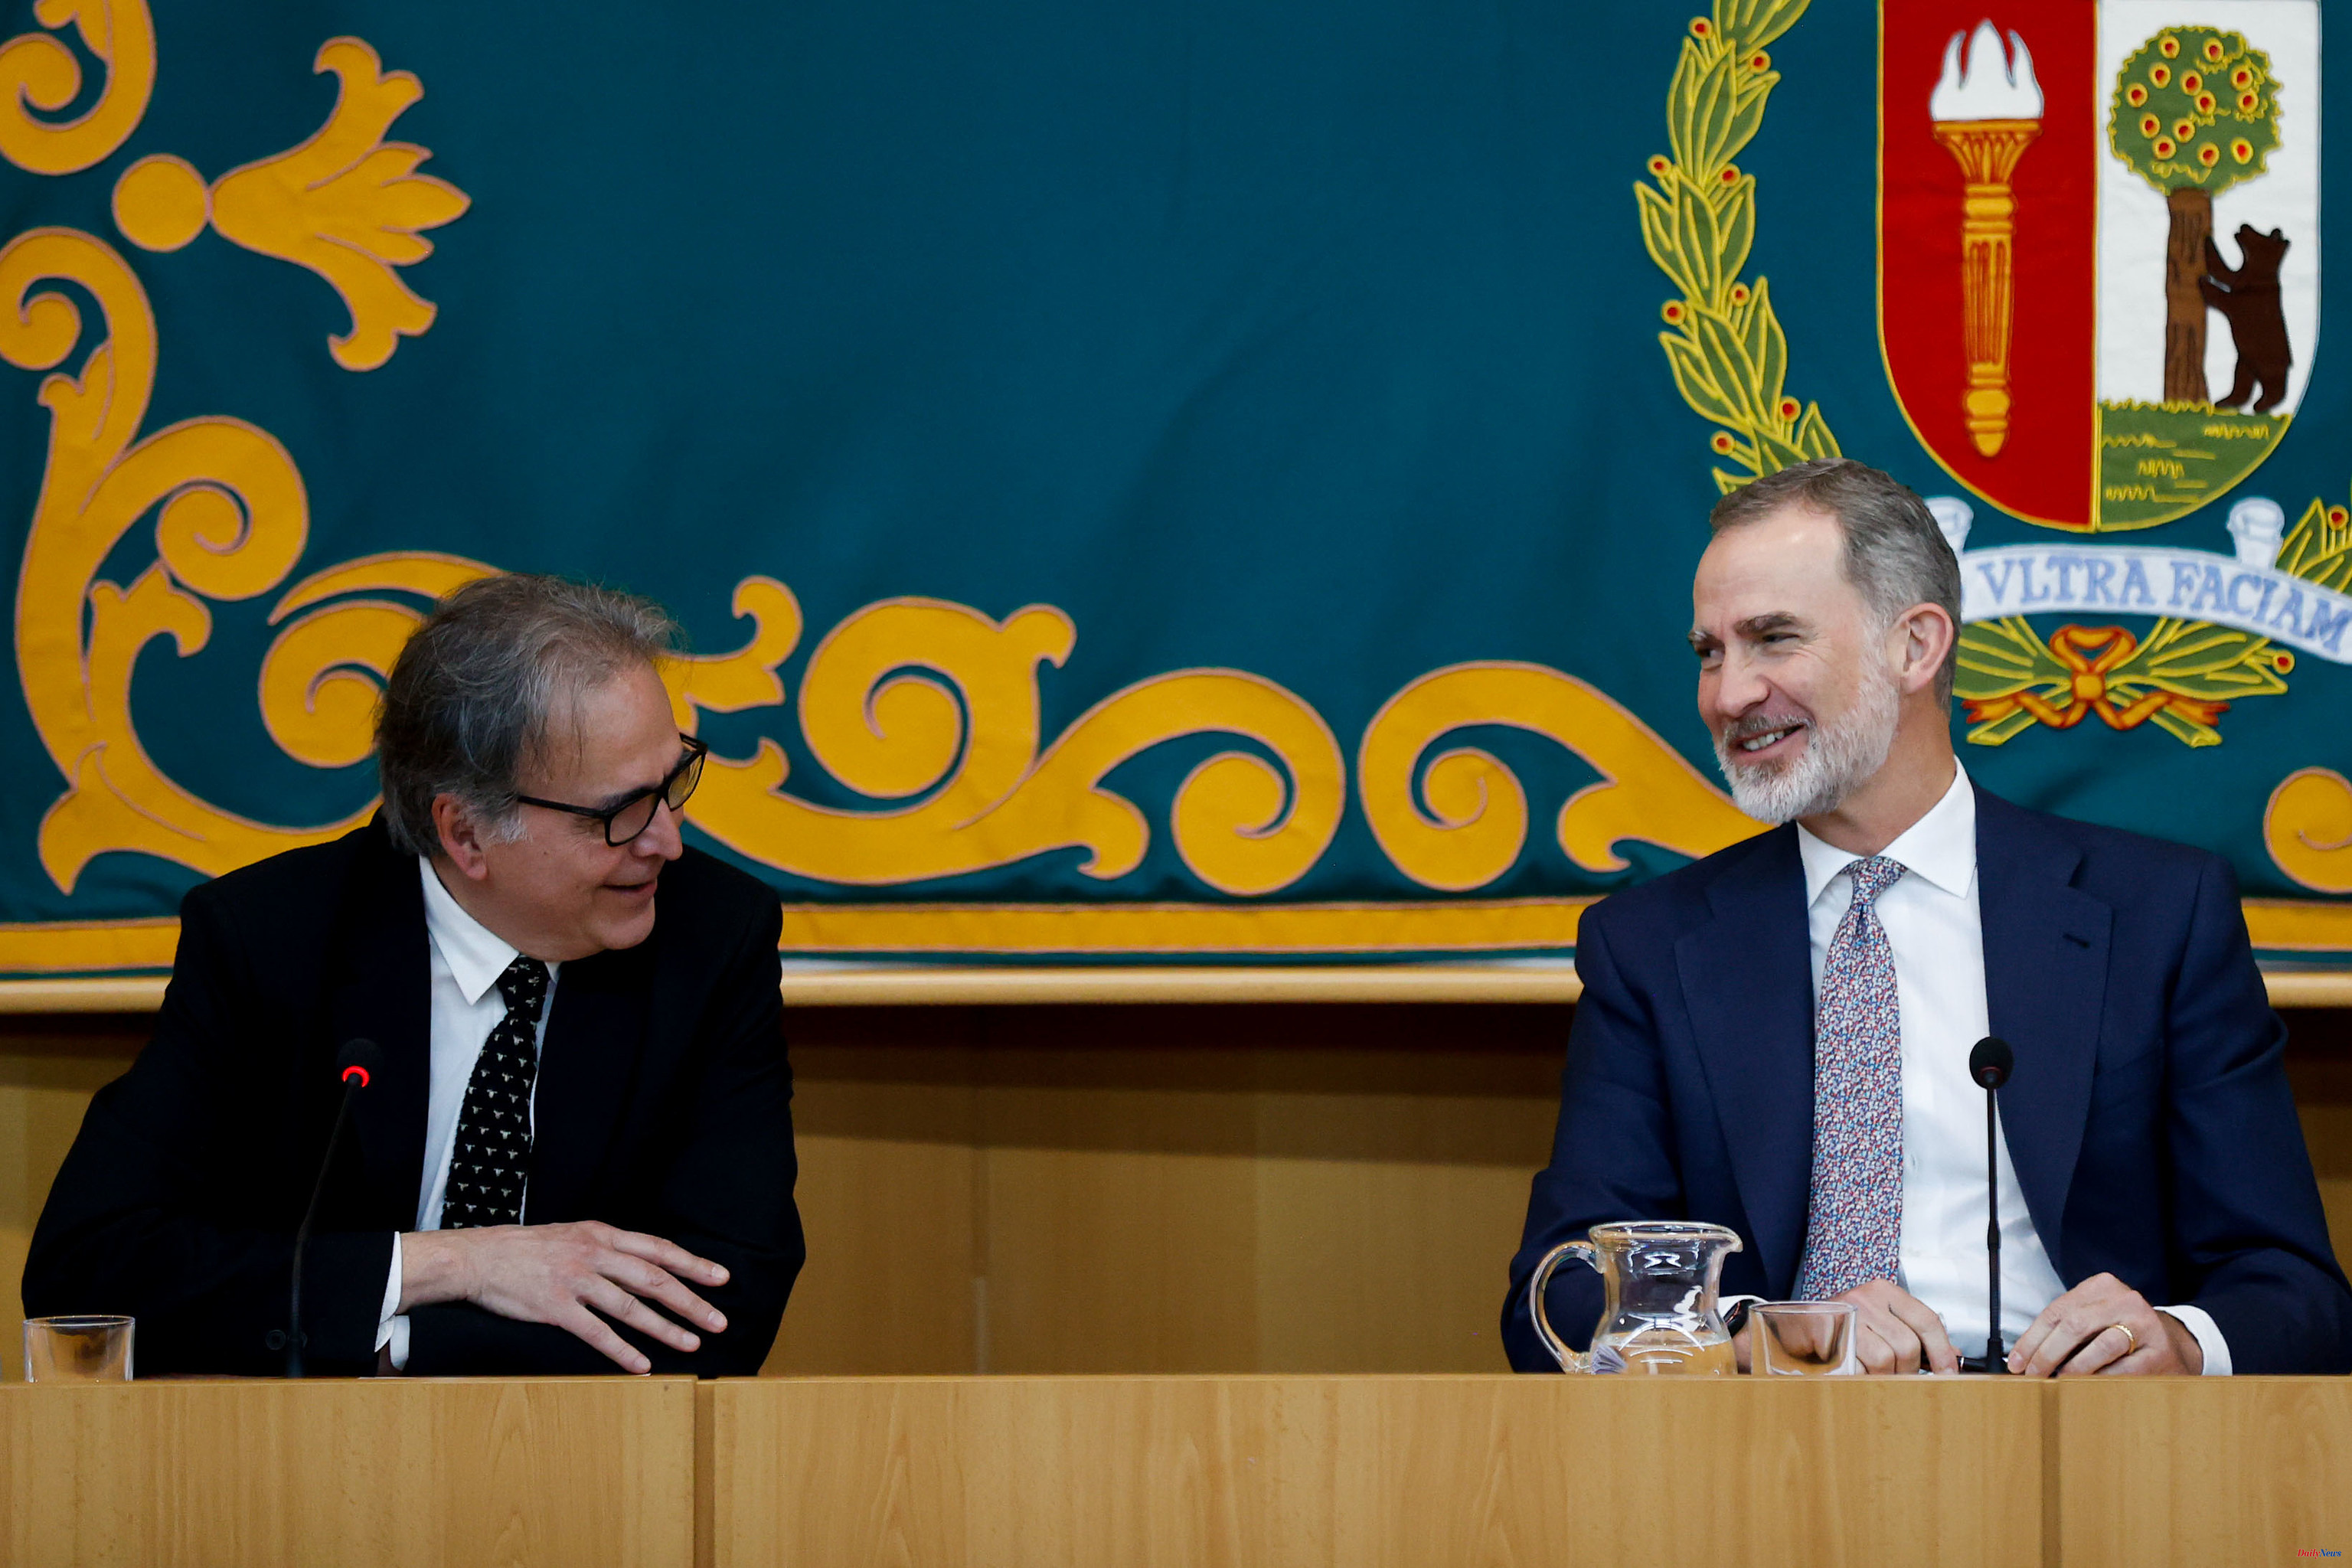 Monarchy Felipe VI returns to university 30 years later: "He was one more, but his family was in the coins"